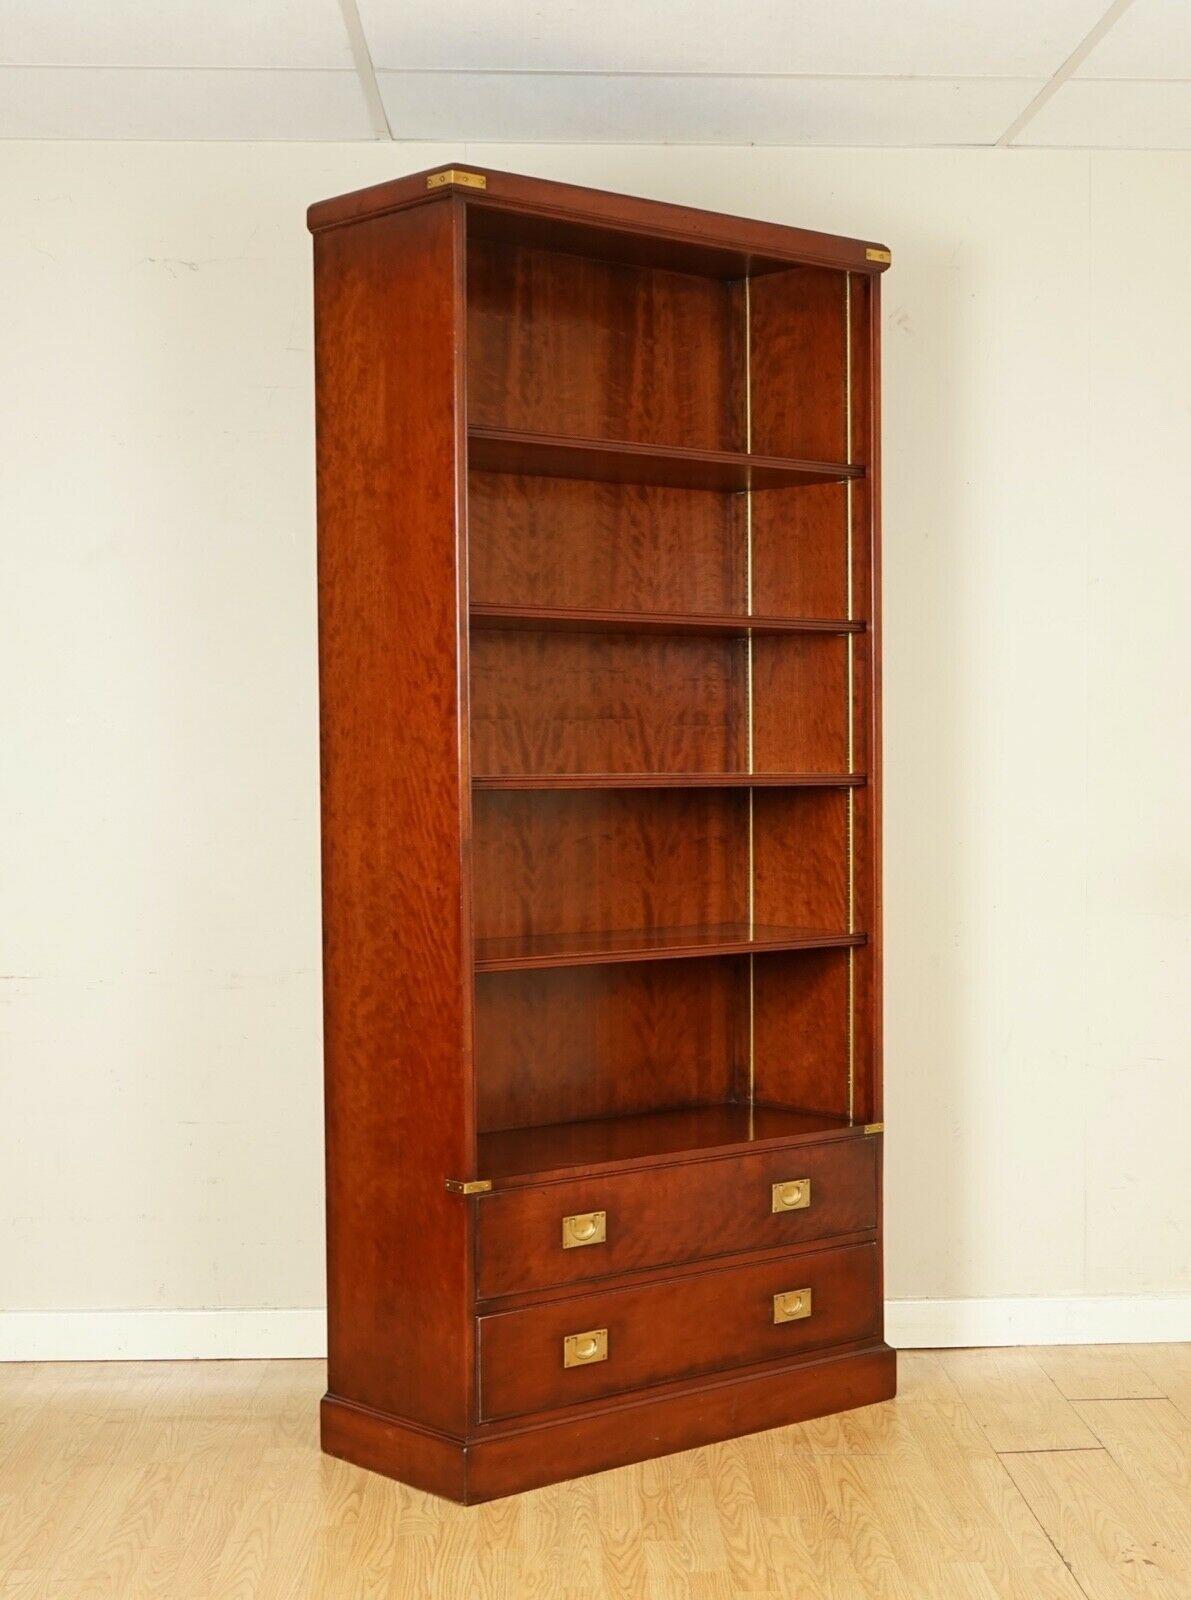 We are delighted to offer this Stunning Kennedy Furniture Military Campaign Bookcase Handmade in England.
This bookcase was retailed through Harrods London, this is one of the finest high bookcases. 
Very well made featuring two drawers and